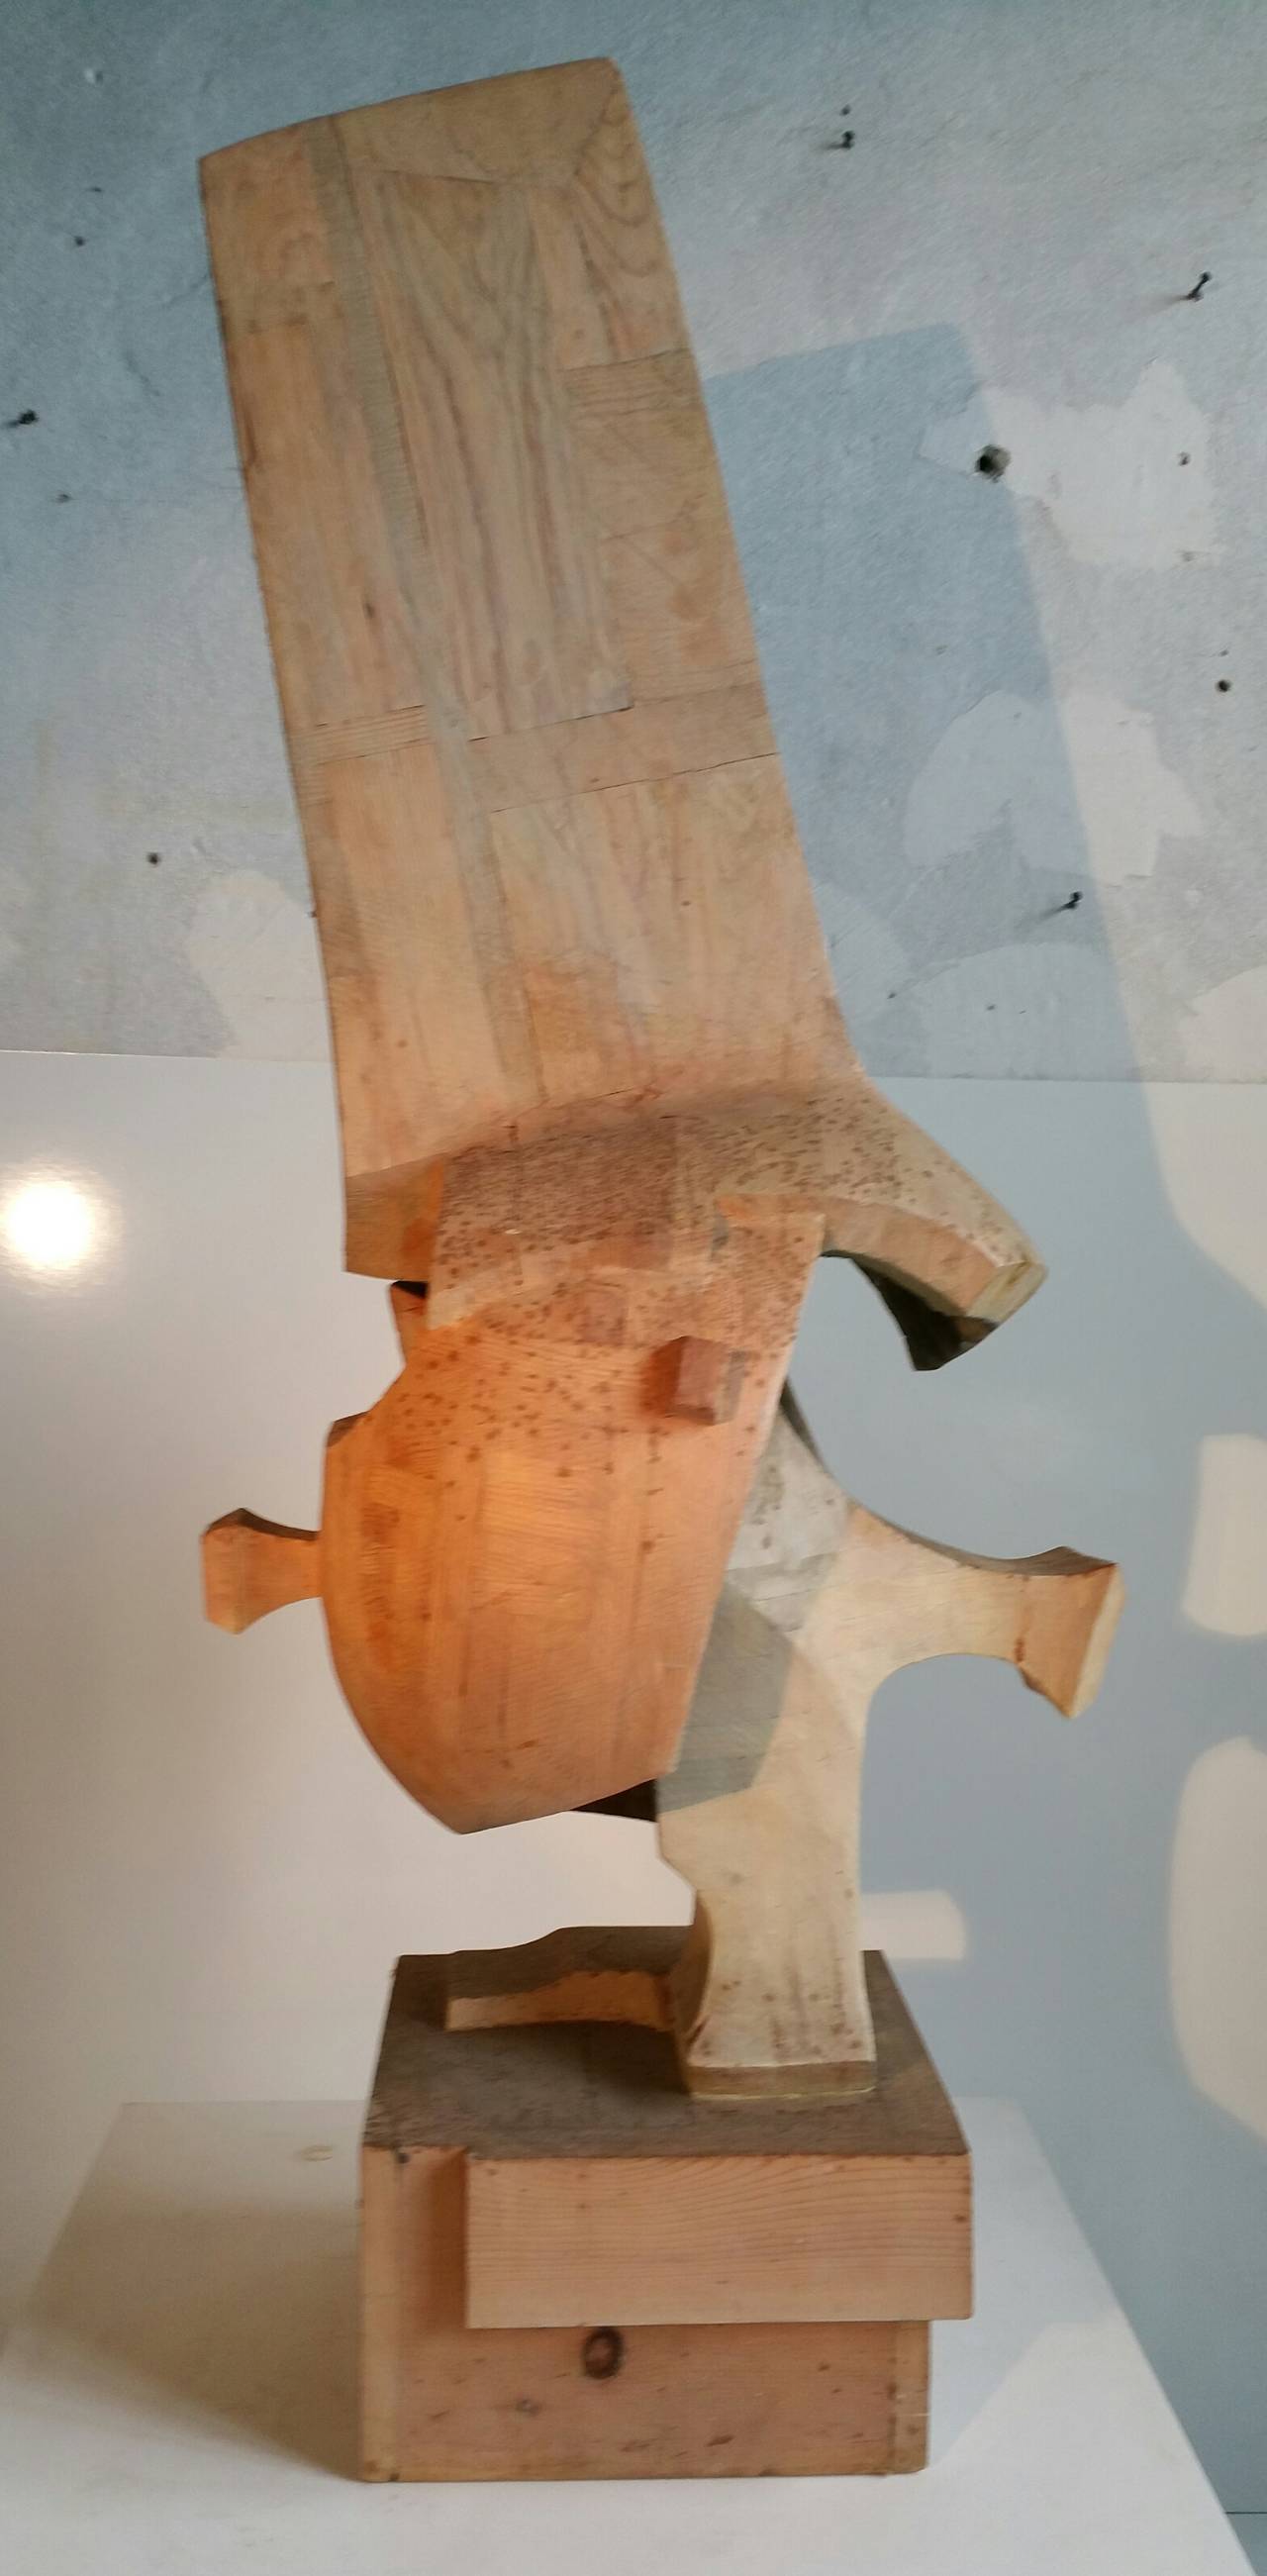 Large abstract Carved and Glued wood sculpture, exicuted by Buffalo State University professor Richard Brock, 1965. Stunning modernist design, strong presence, will make a statement in any room setting.

Brock was born in Tacoma, Ohio and was a